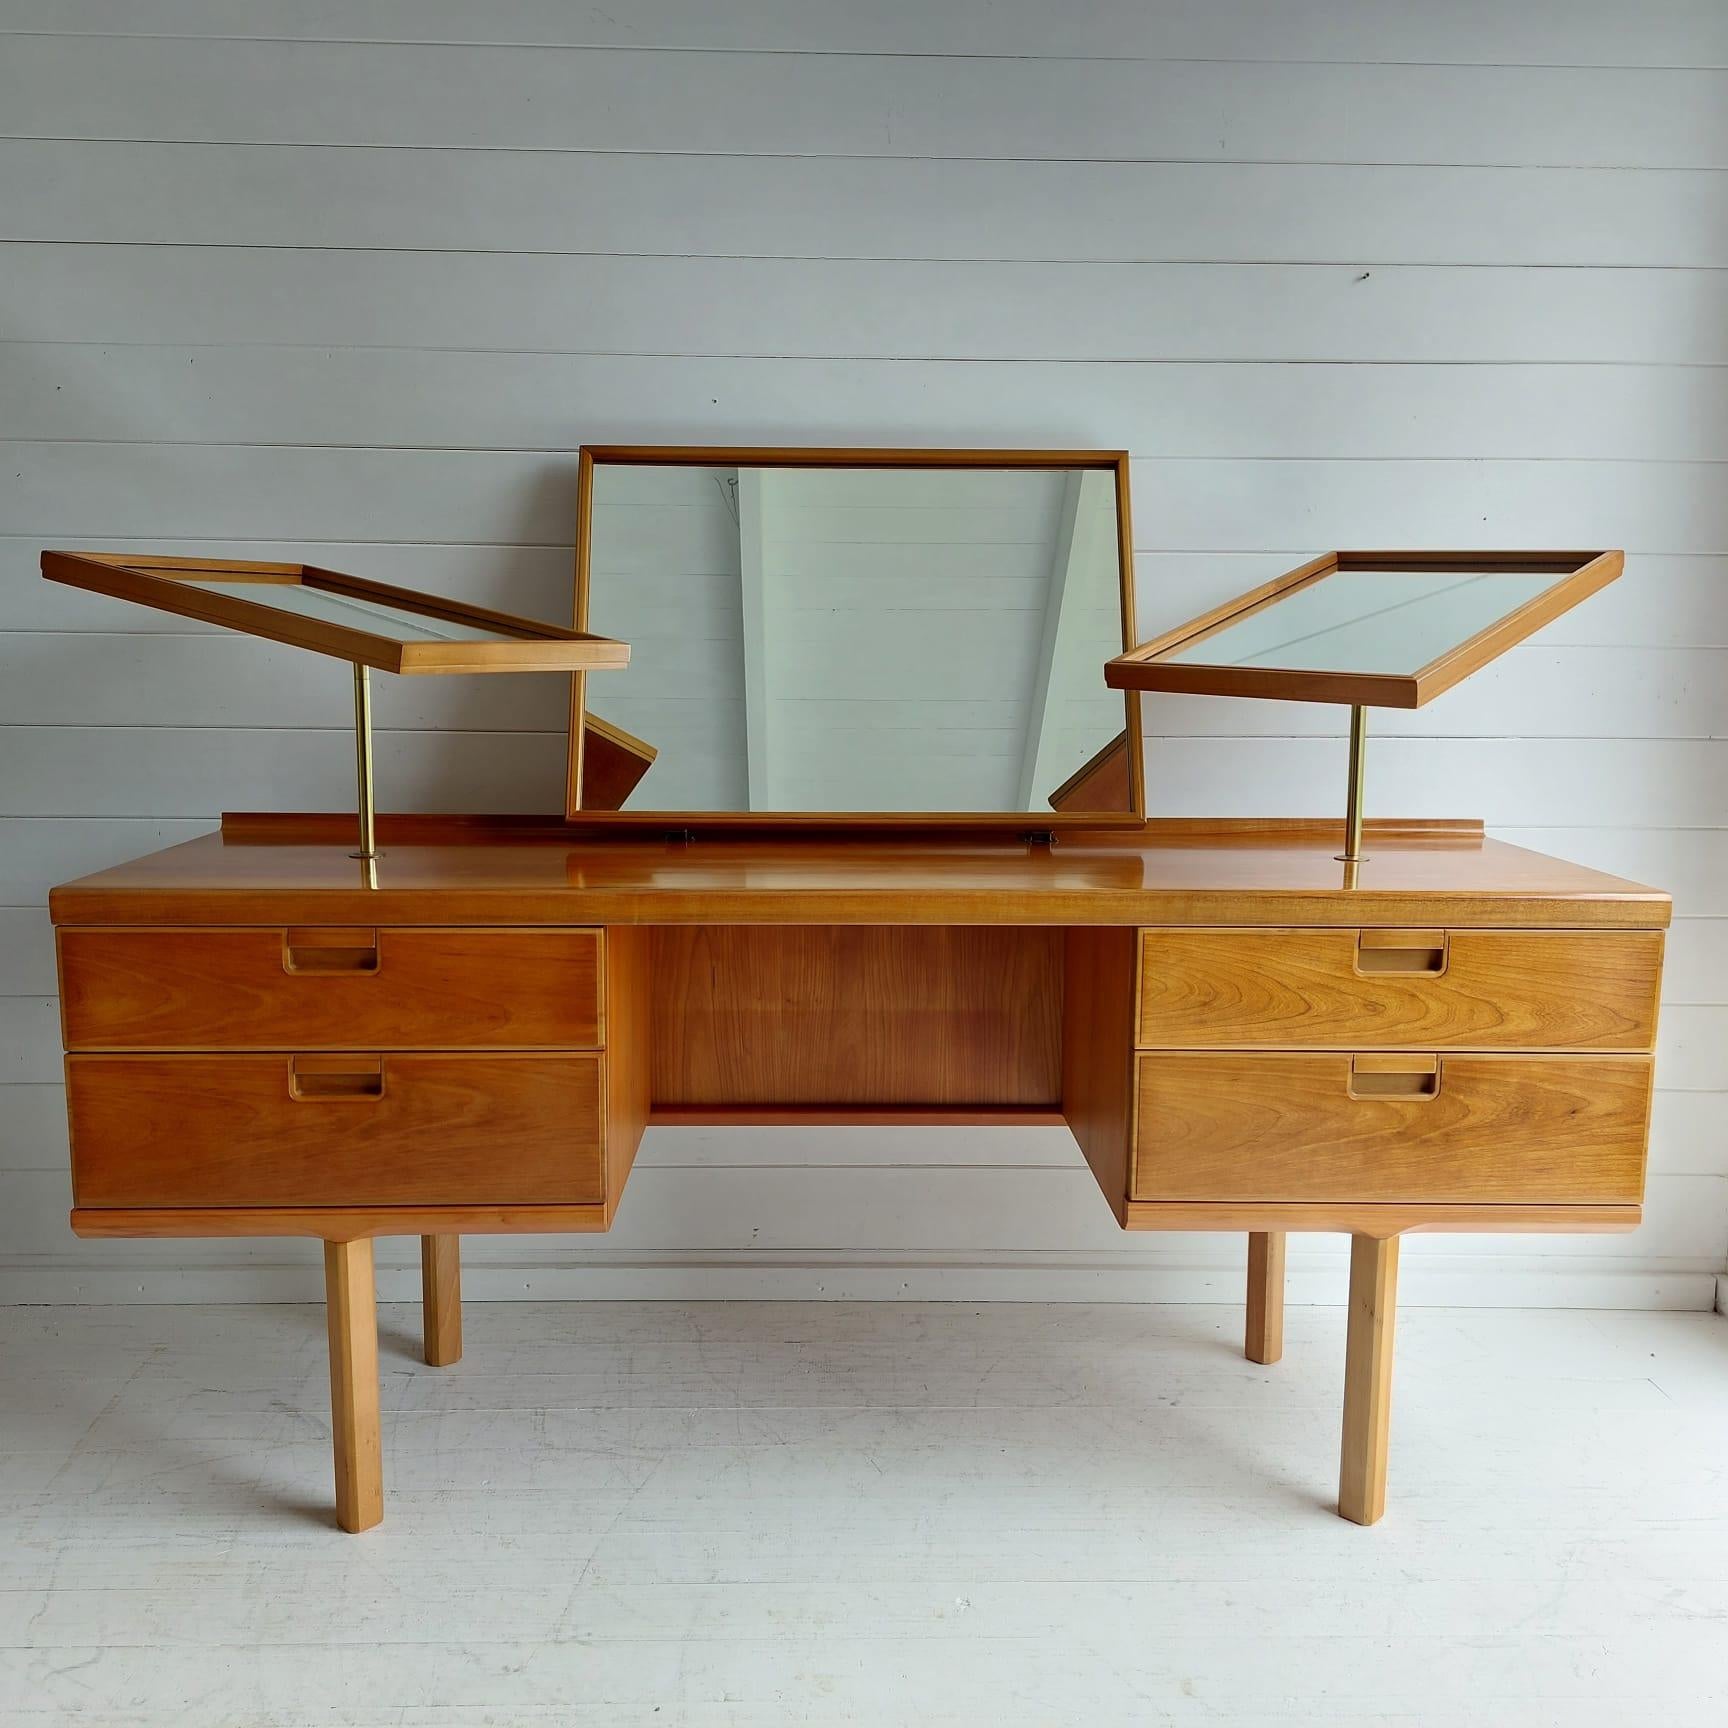 Midcentury White and Newton Dressing Table/desk with triple adjustable mirror in light teak with beech trim, 1960s
British teak and beechwood dressing table from the late 1960s with stool.

This beautiful dressing table is a wonderful example of